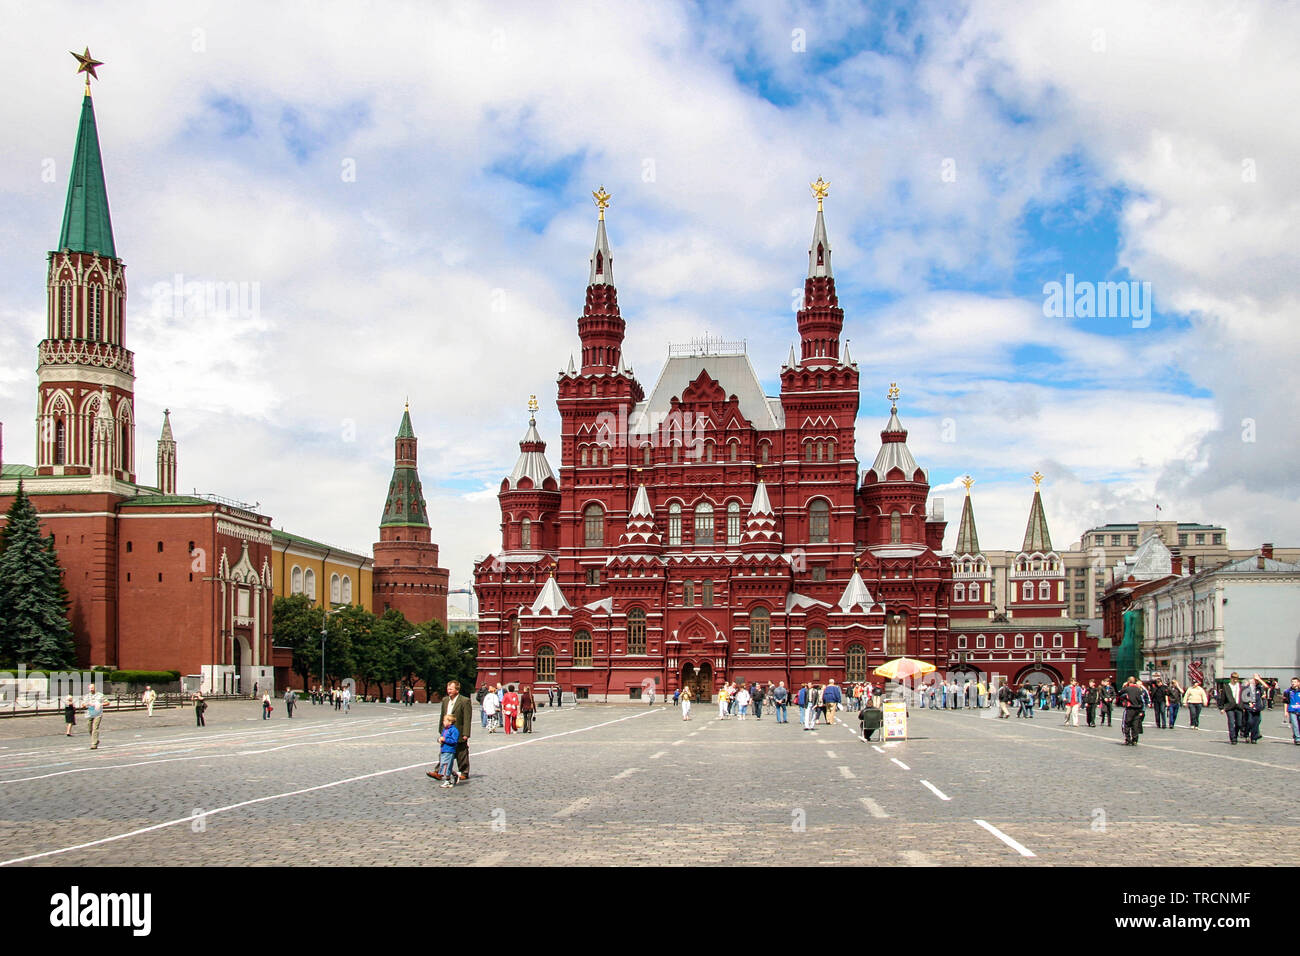 The State Histiorical Museum at Red Square established in 1872, Moscow Russian Federation Stock Photo